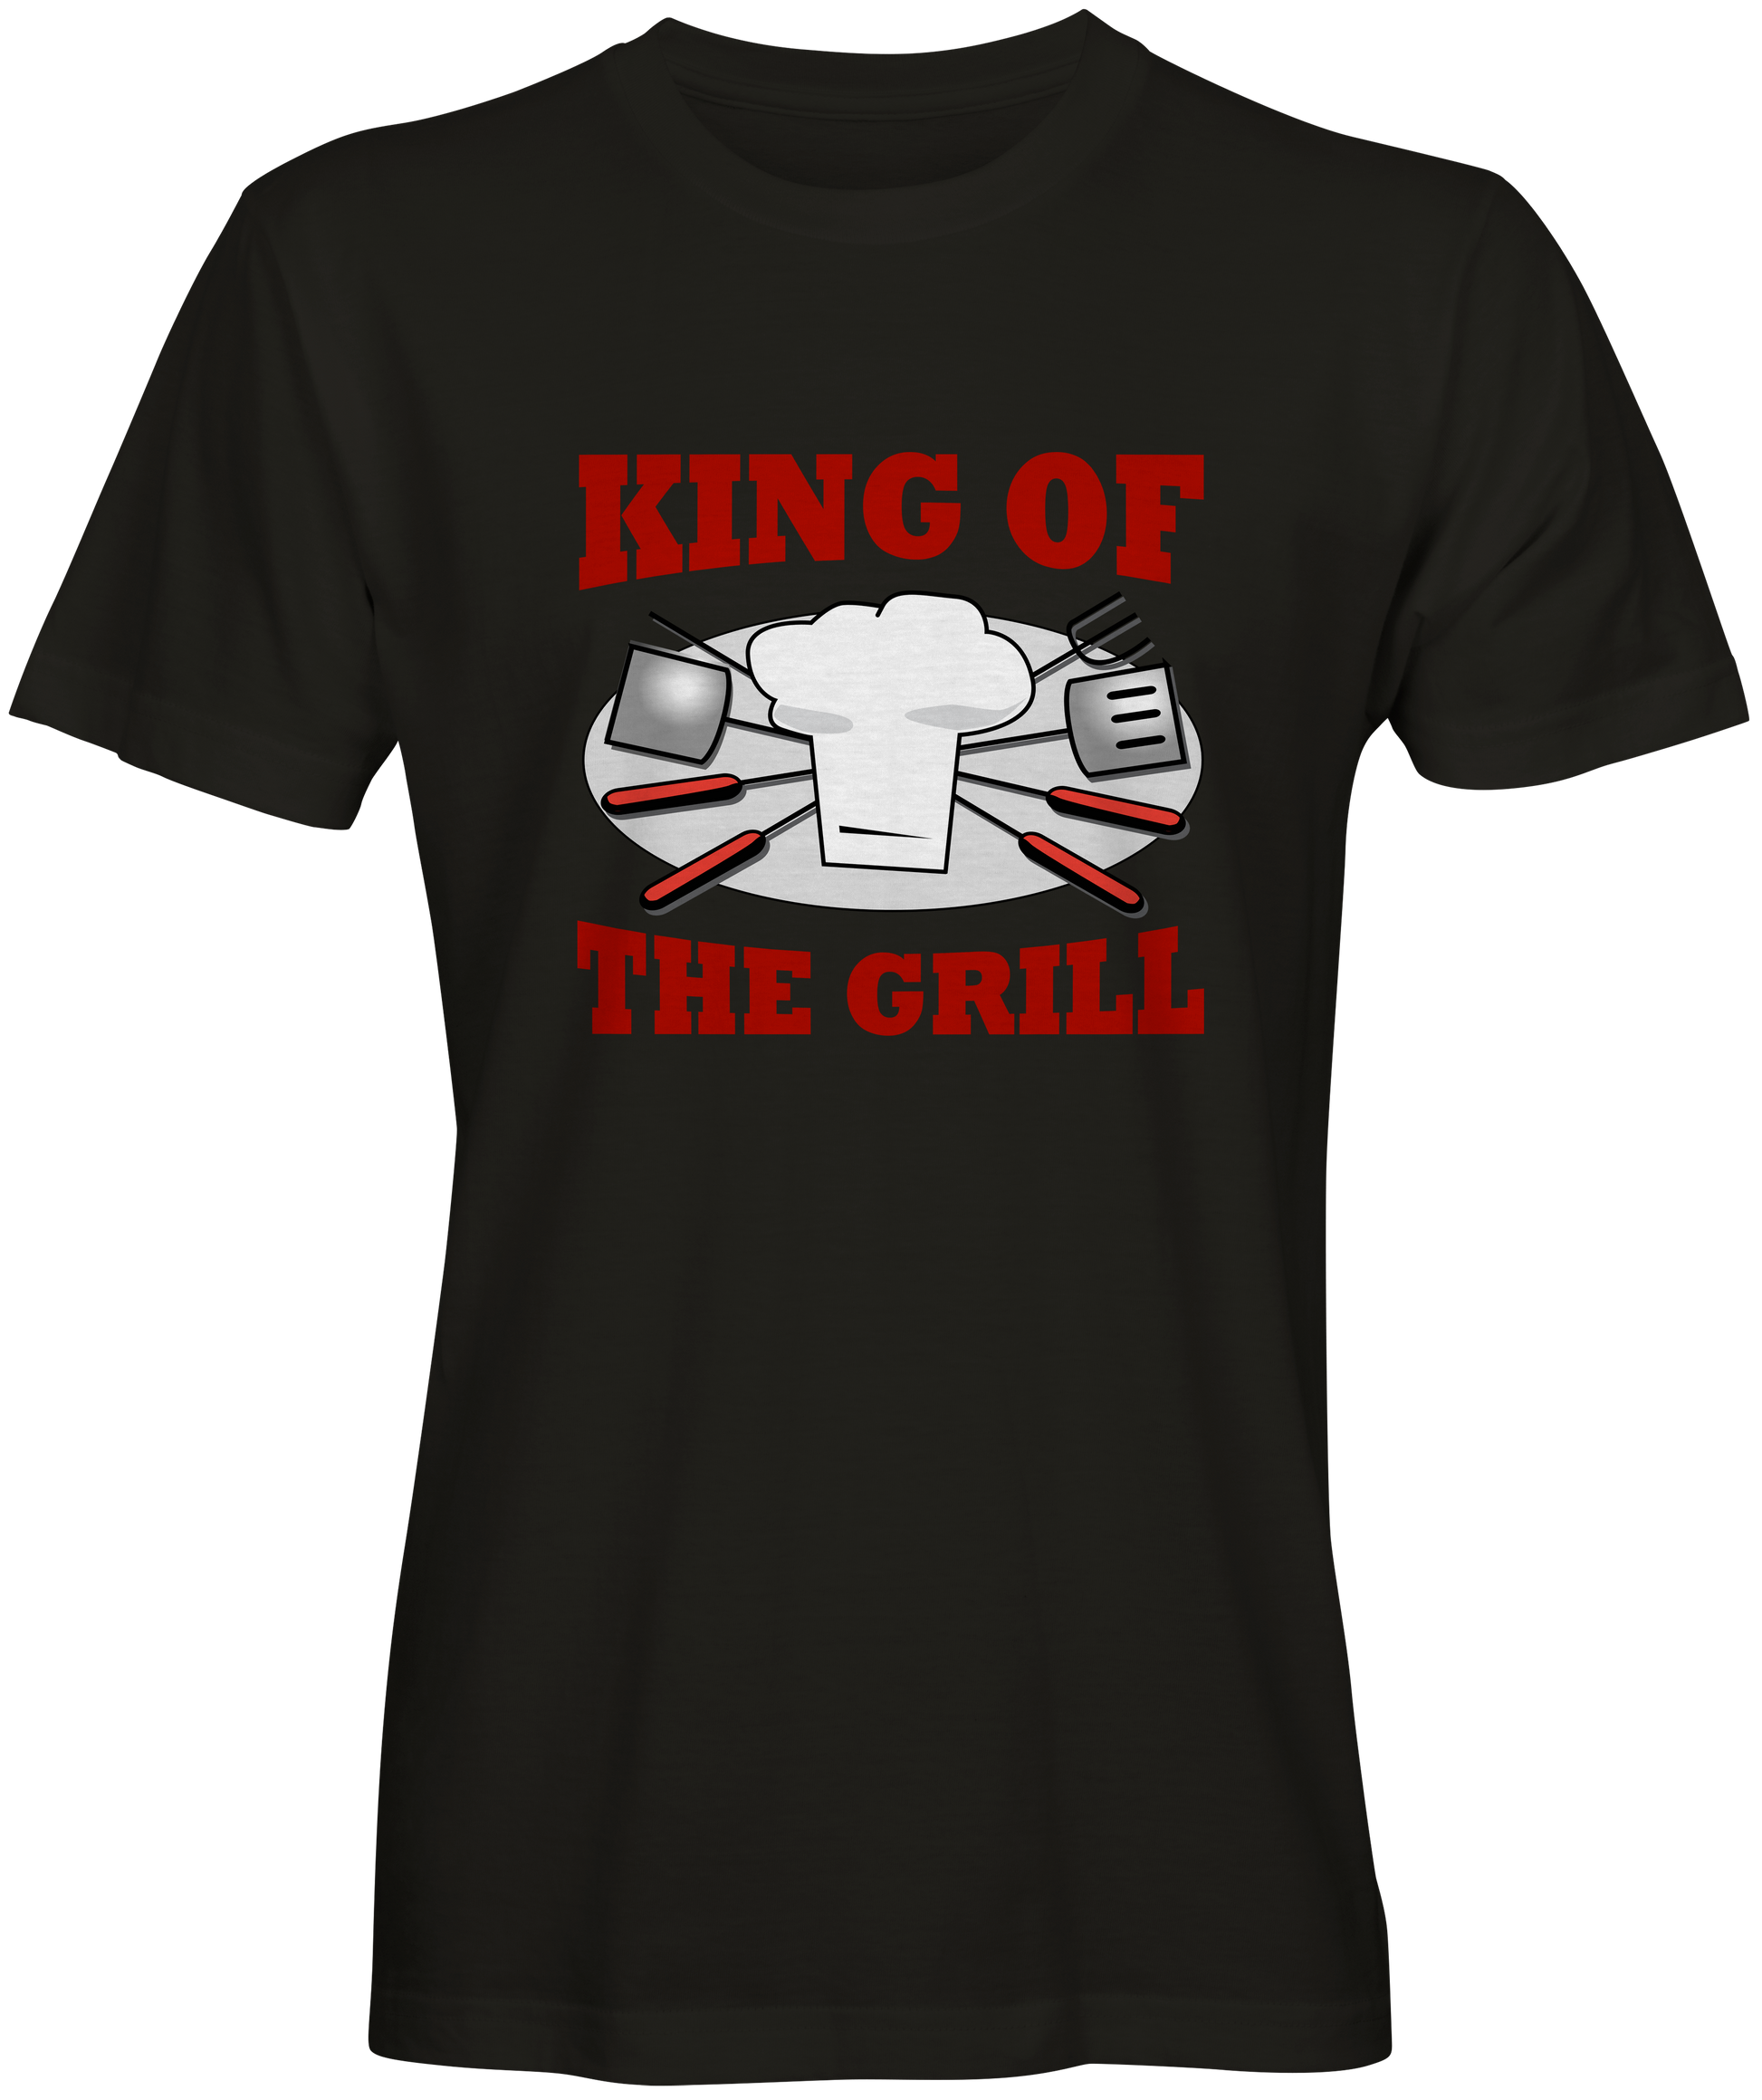  King of the Grill  T-shirts 